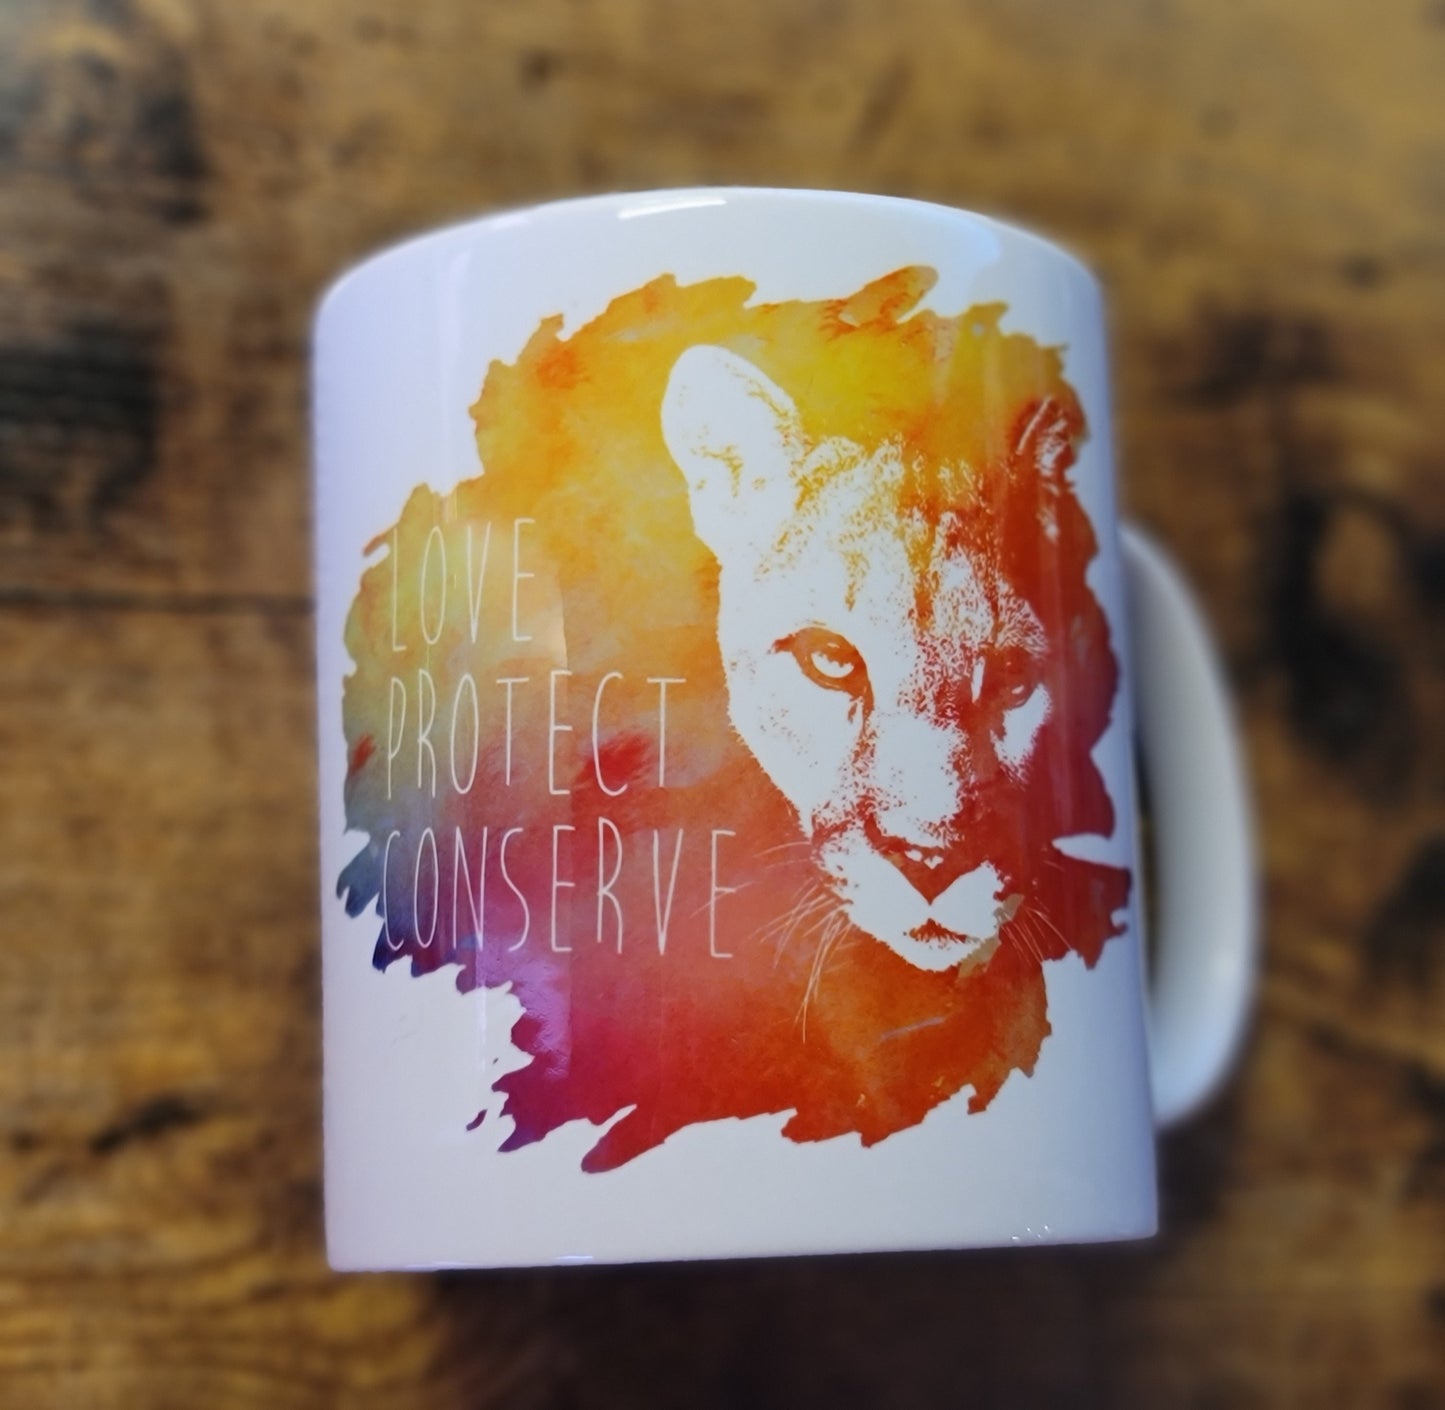 Love Protect Conserve Cougar Face Watercolor Background 11oz Mug (Made to Order)